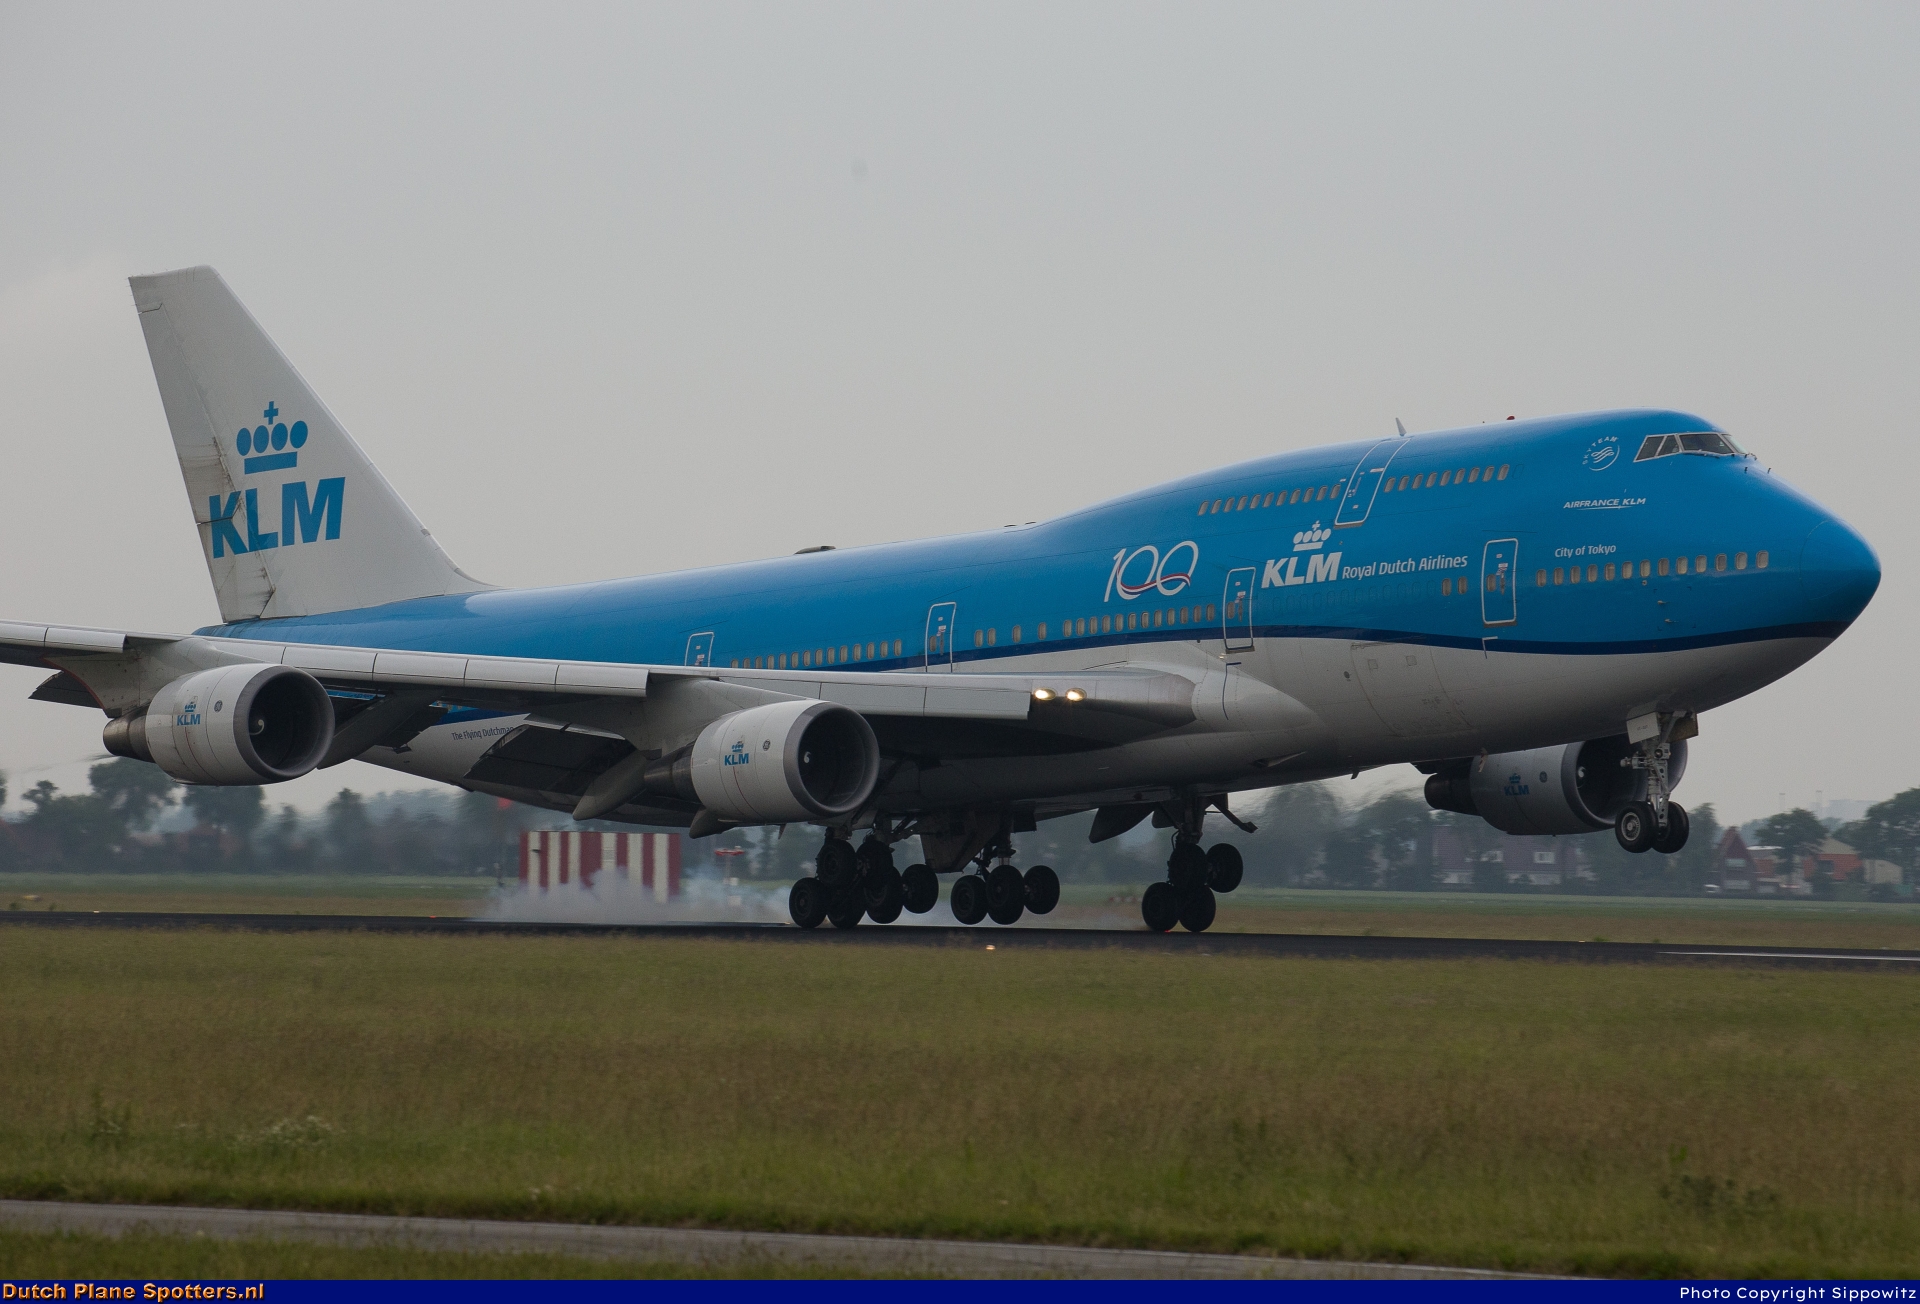 PH-BFT Boeing 747-400 KLM Royal Dutch Airlines by Sippowitz